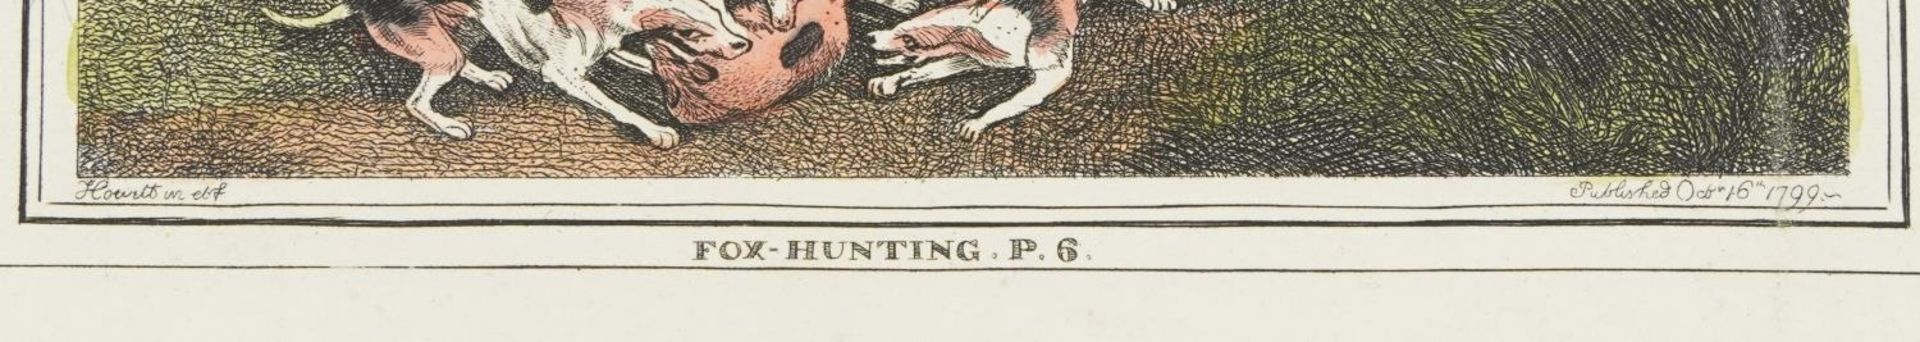 Foxhunting P5 and P6, two 18th century coloured engravings, unframed, each 29.5cm x 27.5cm : For - Image 8 of 9